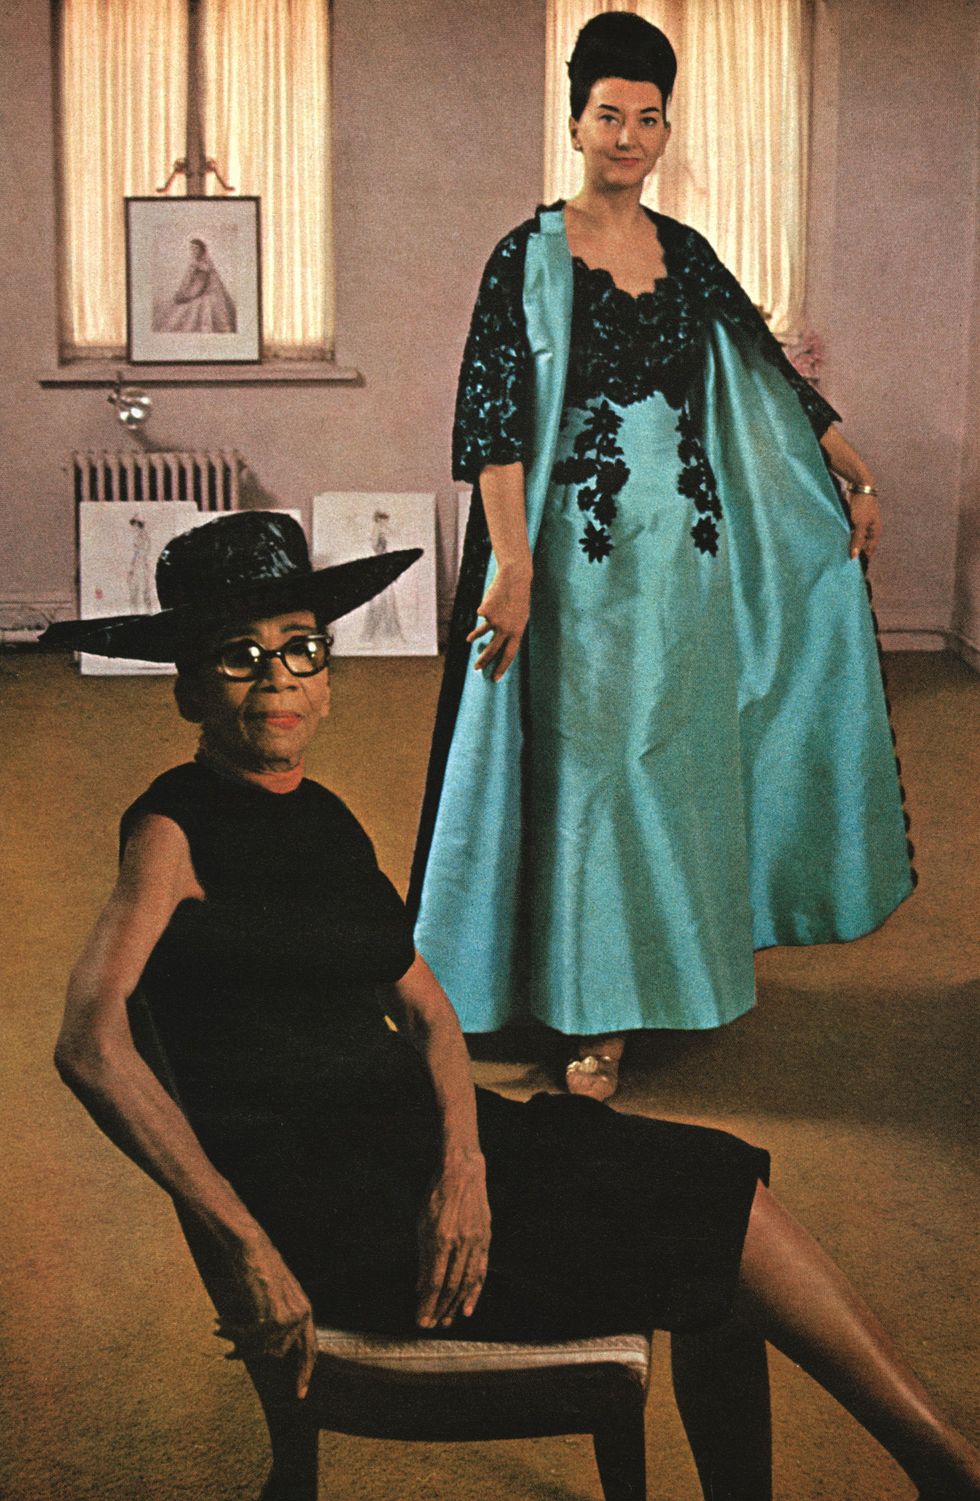 dean of fashion designers, ann lowe of new york city, who has been creating beautiful dresses and hand made flowers since when was a child of six she is pictured with london model judith palmer, wearing lowe theater gown and coat of italian mecado silk, with black lace reembroidered in black soutache moneta sleet, jrljohnson publishing archive